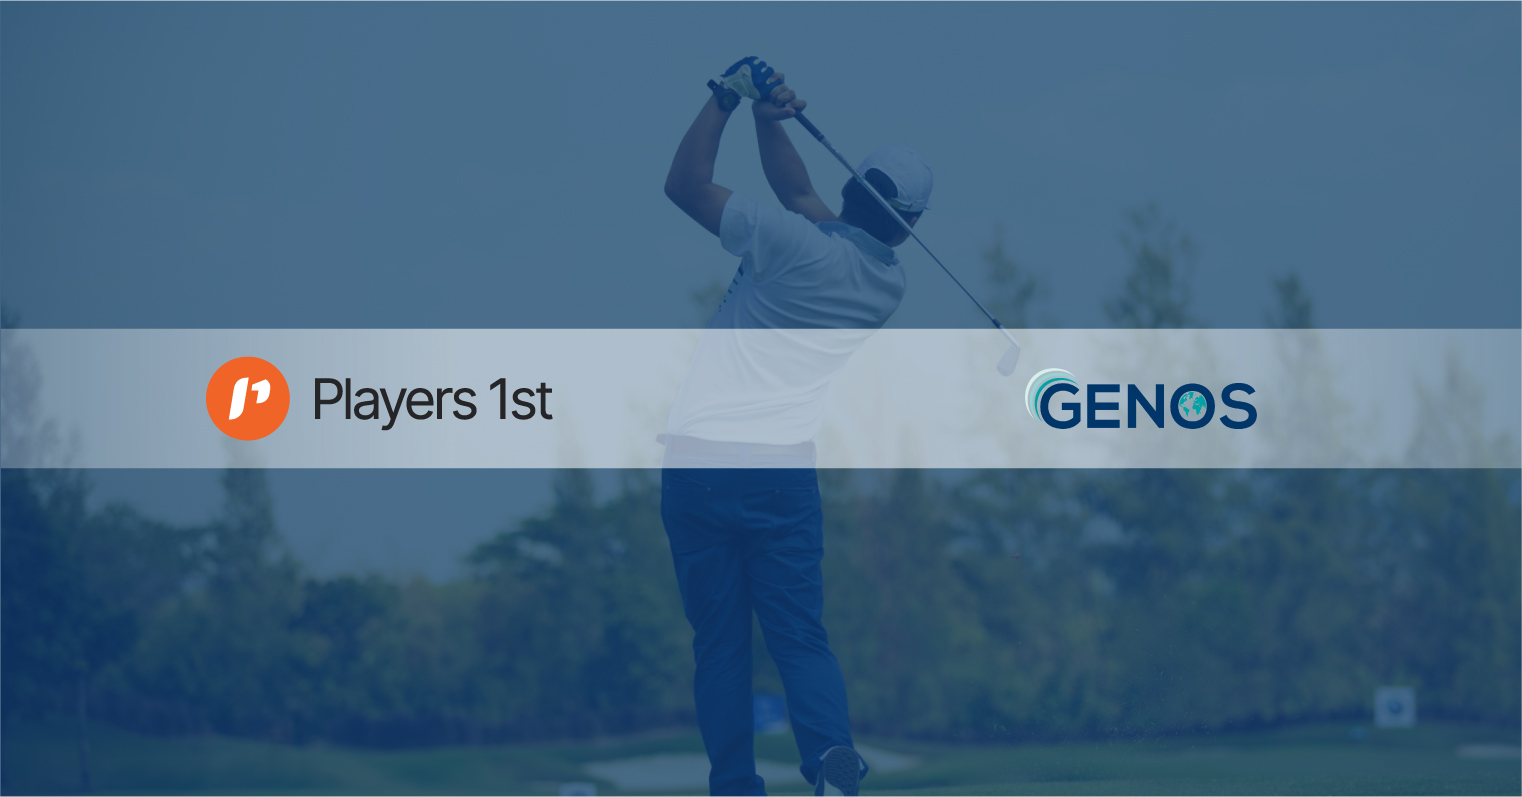 Genos is proud to be chosen as the nearshoring partner for Players 1st